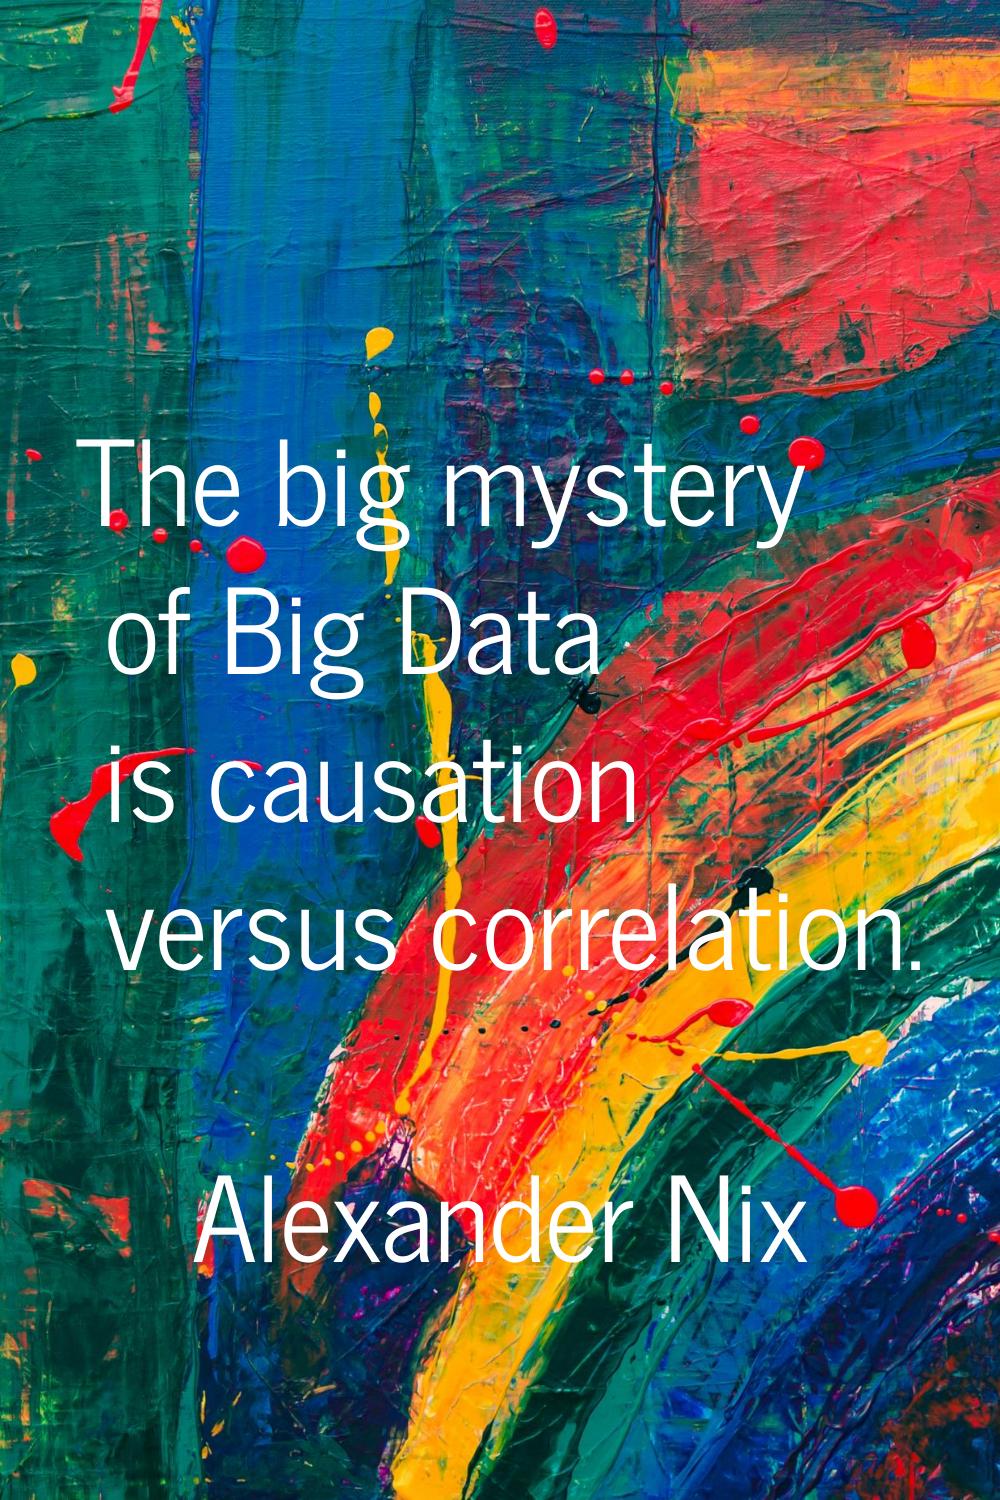 The big mystery of Big Data is causation versus correlation.